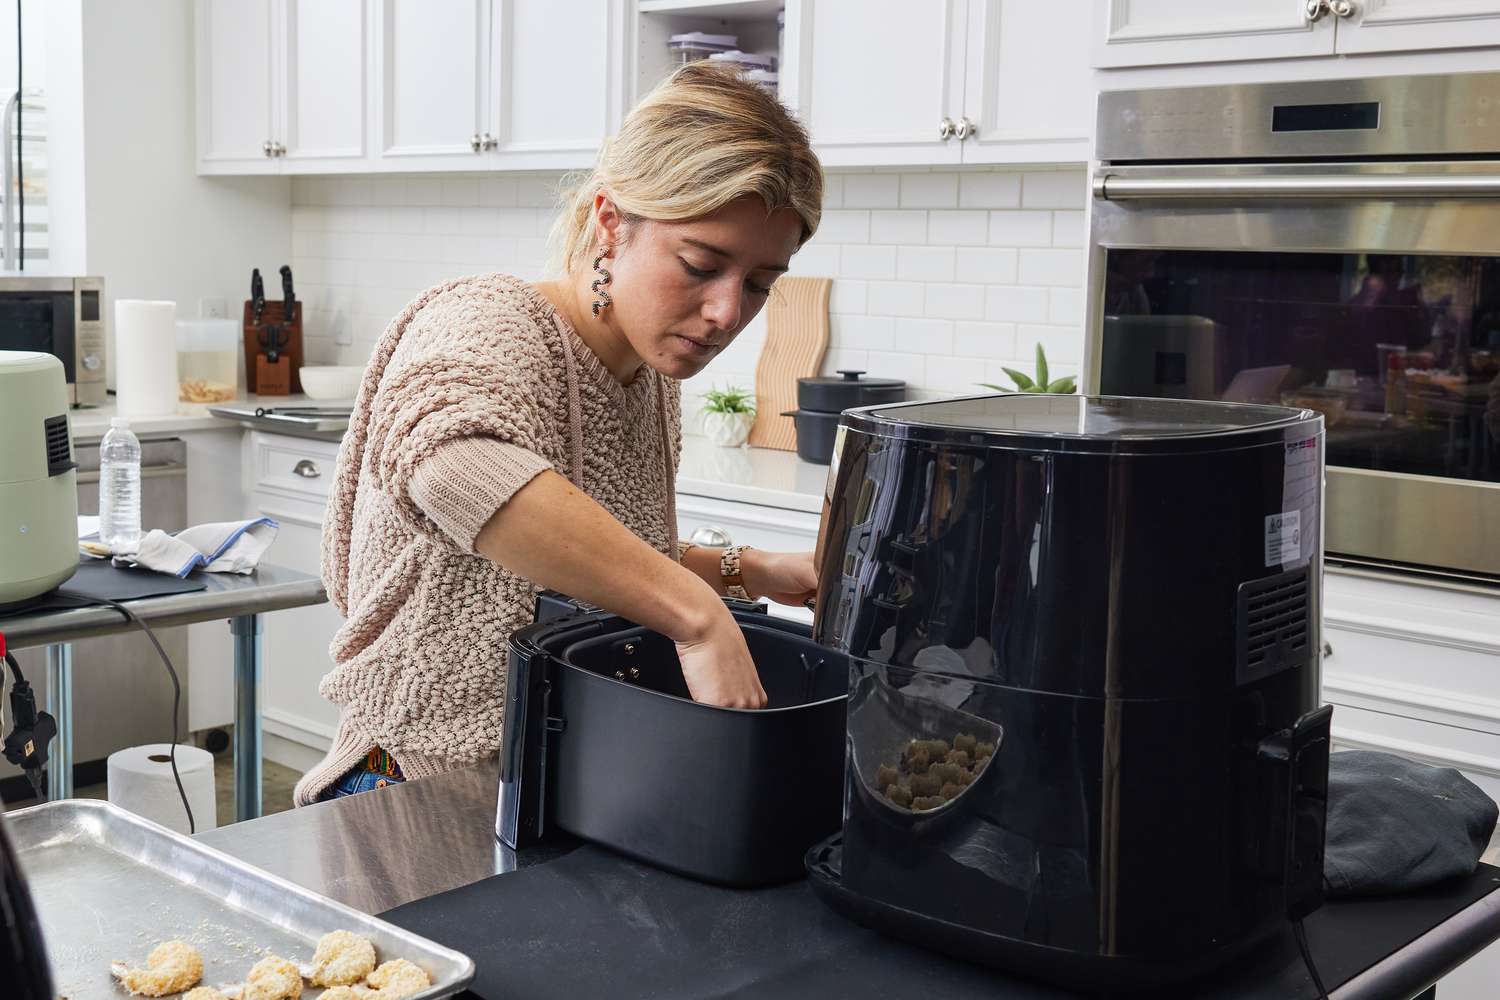 The Best Microwave Air Fryer Combos Are Kitchen Game Changers